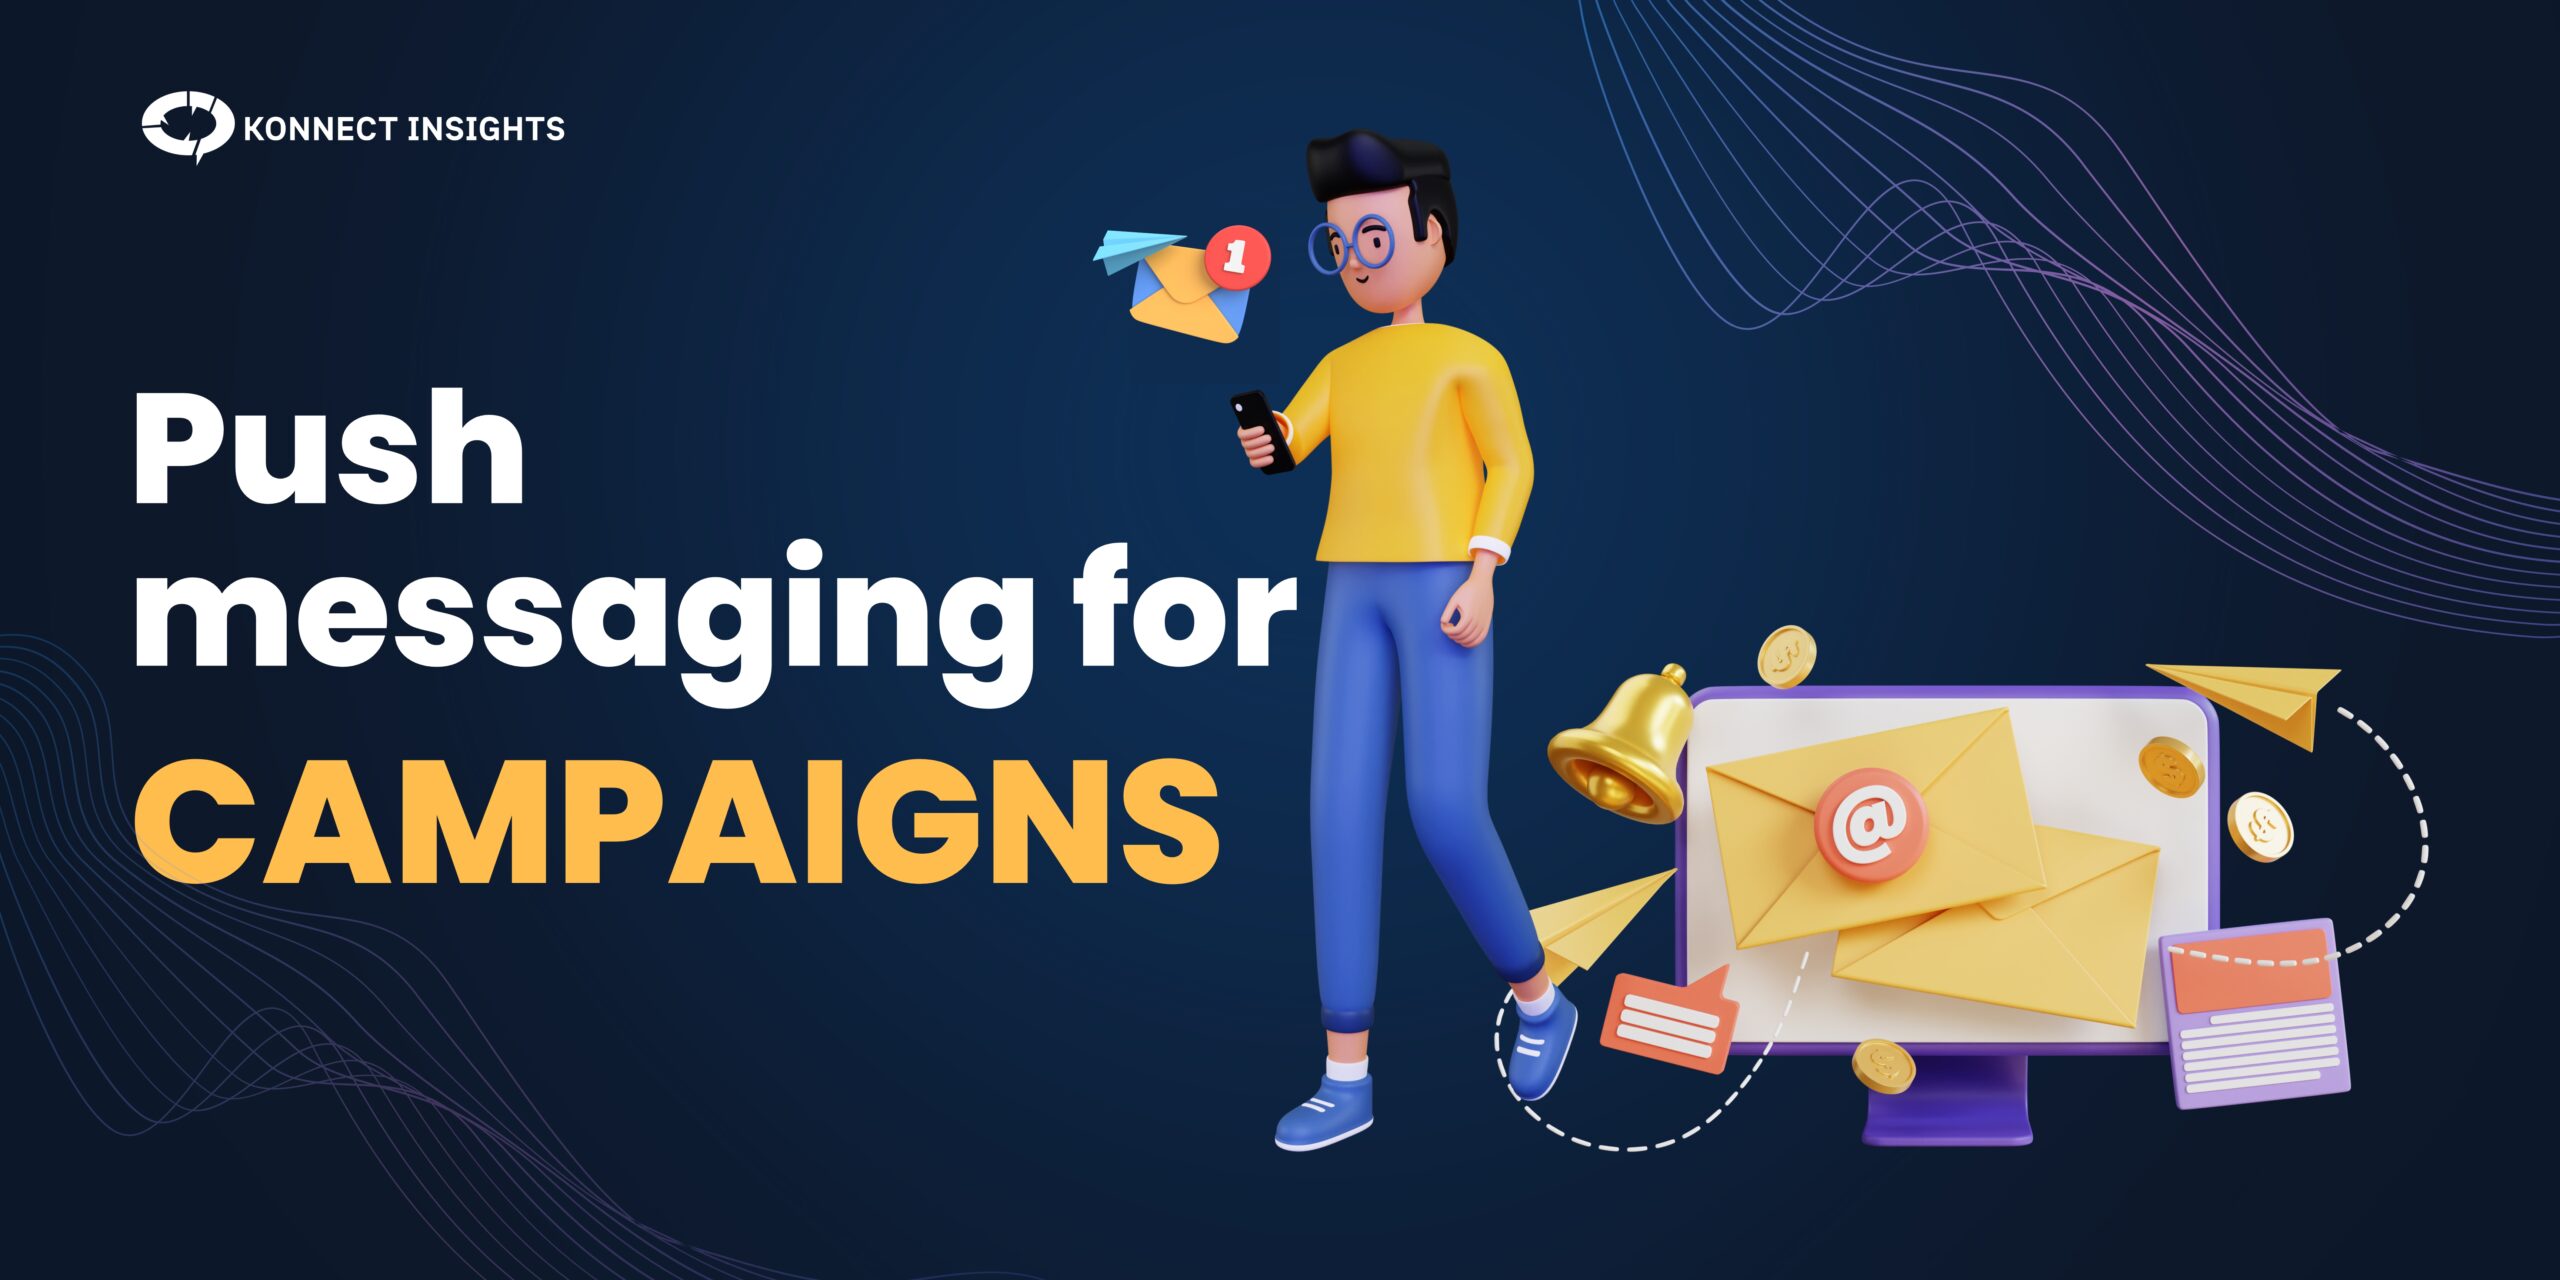 Push messaging for campaigns